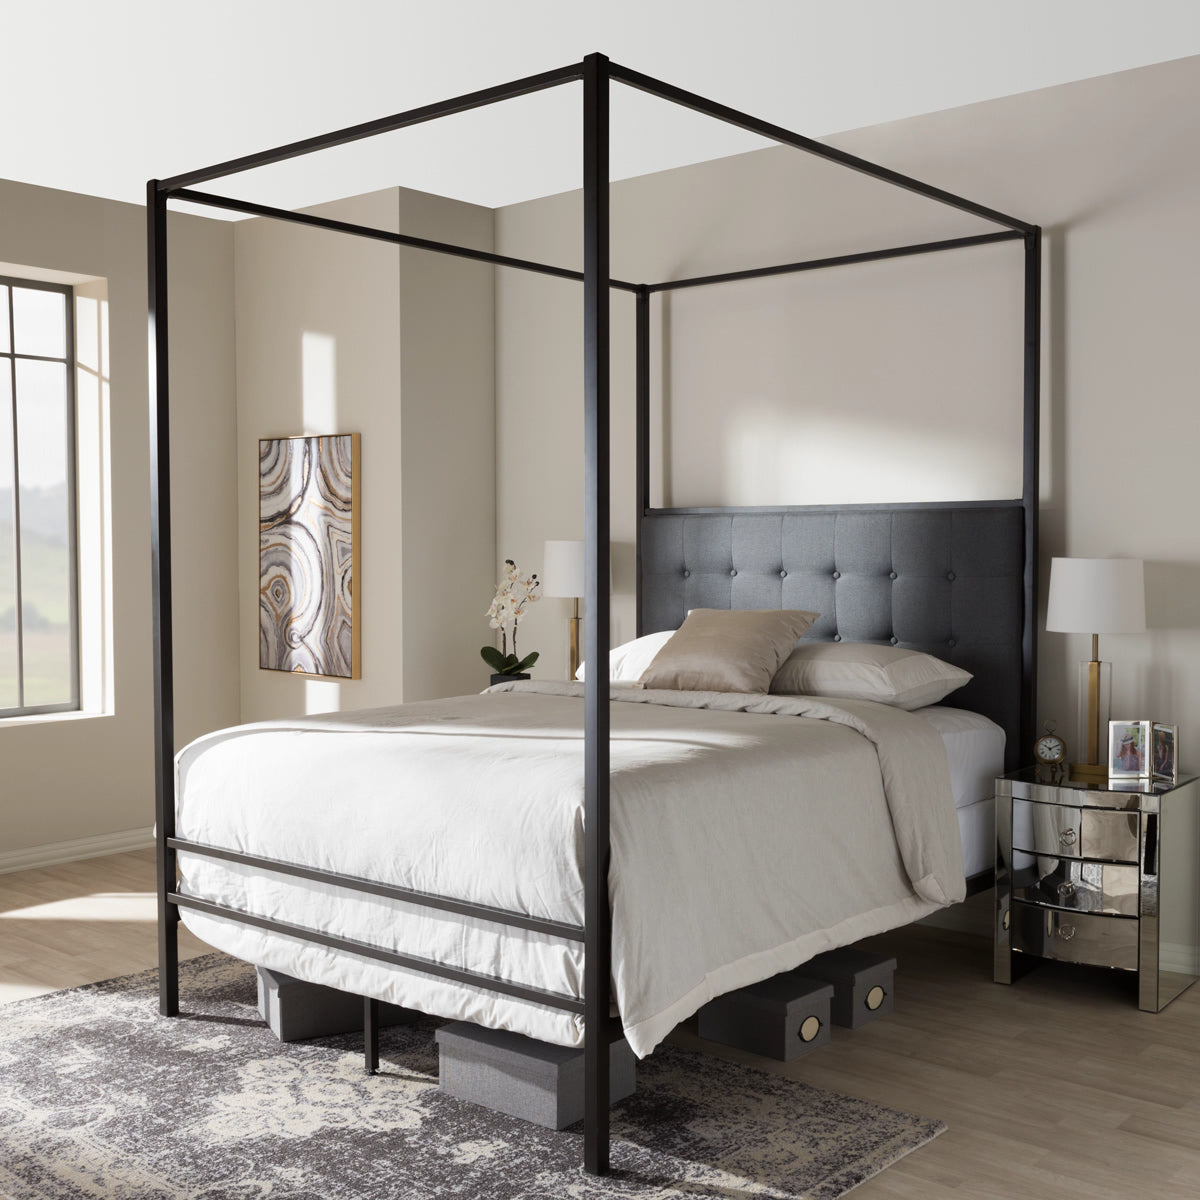 Baxton Studio Eleanor Vintage Industrial Black Finished Metal Canopy Queen Bed Baxton Studio-Queen Bed-Minimal And Modern - 1